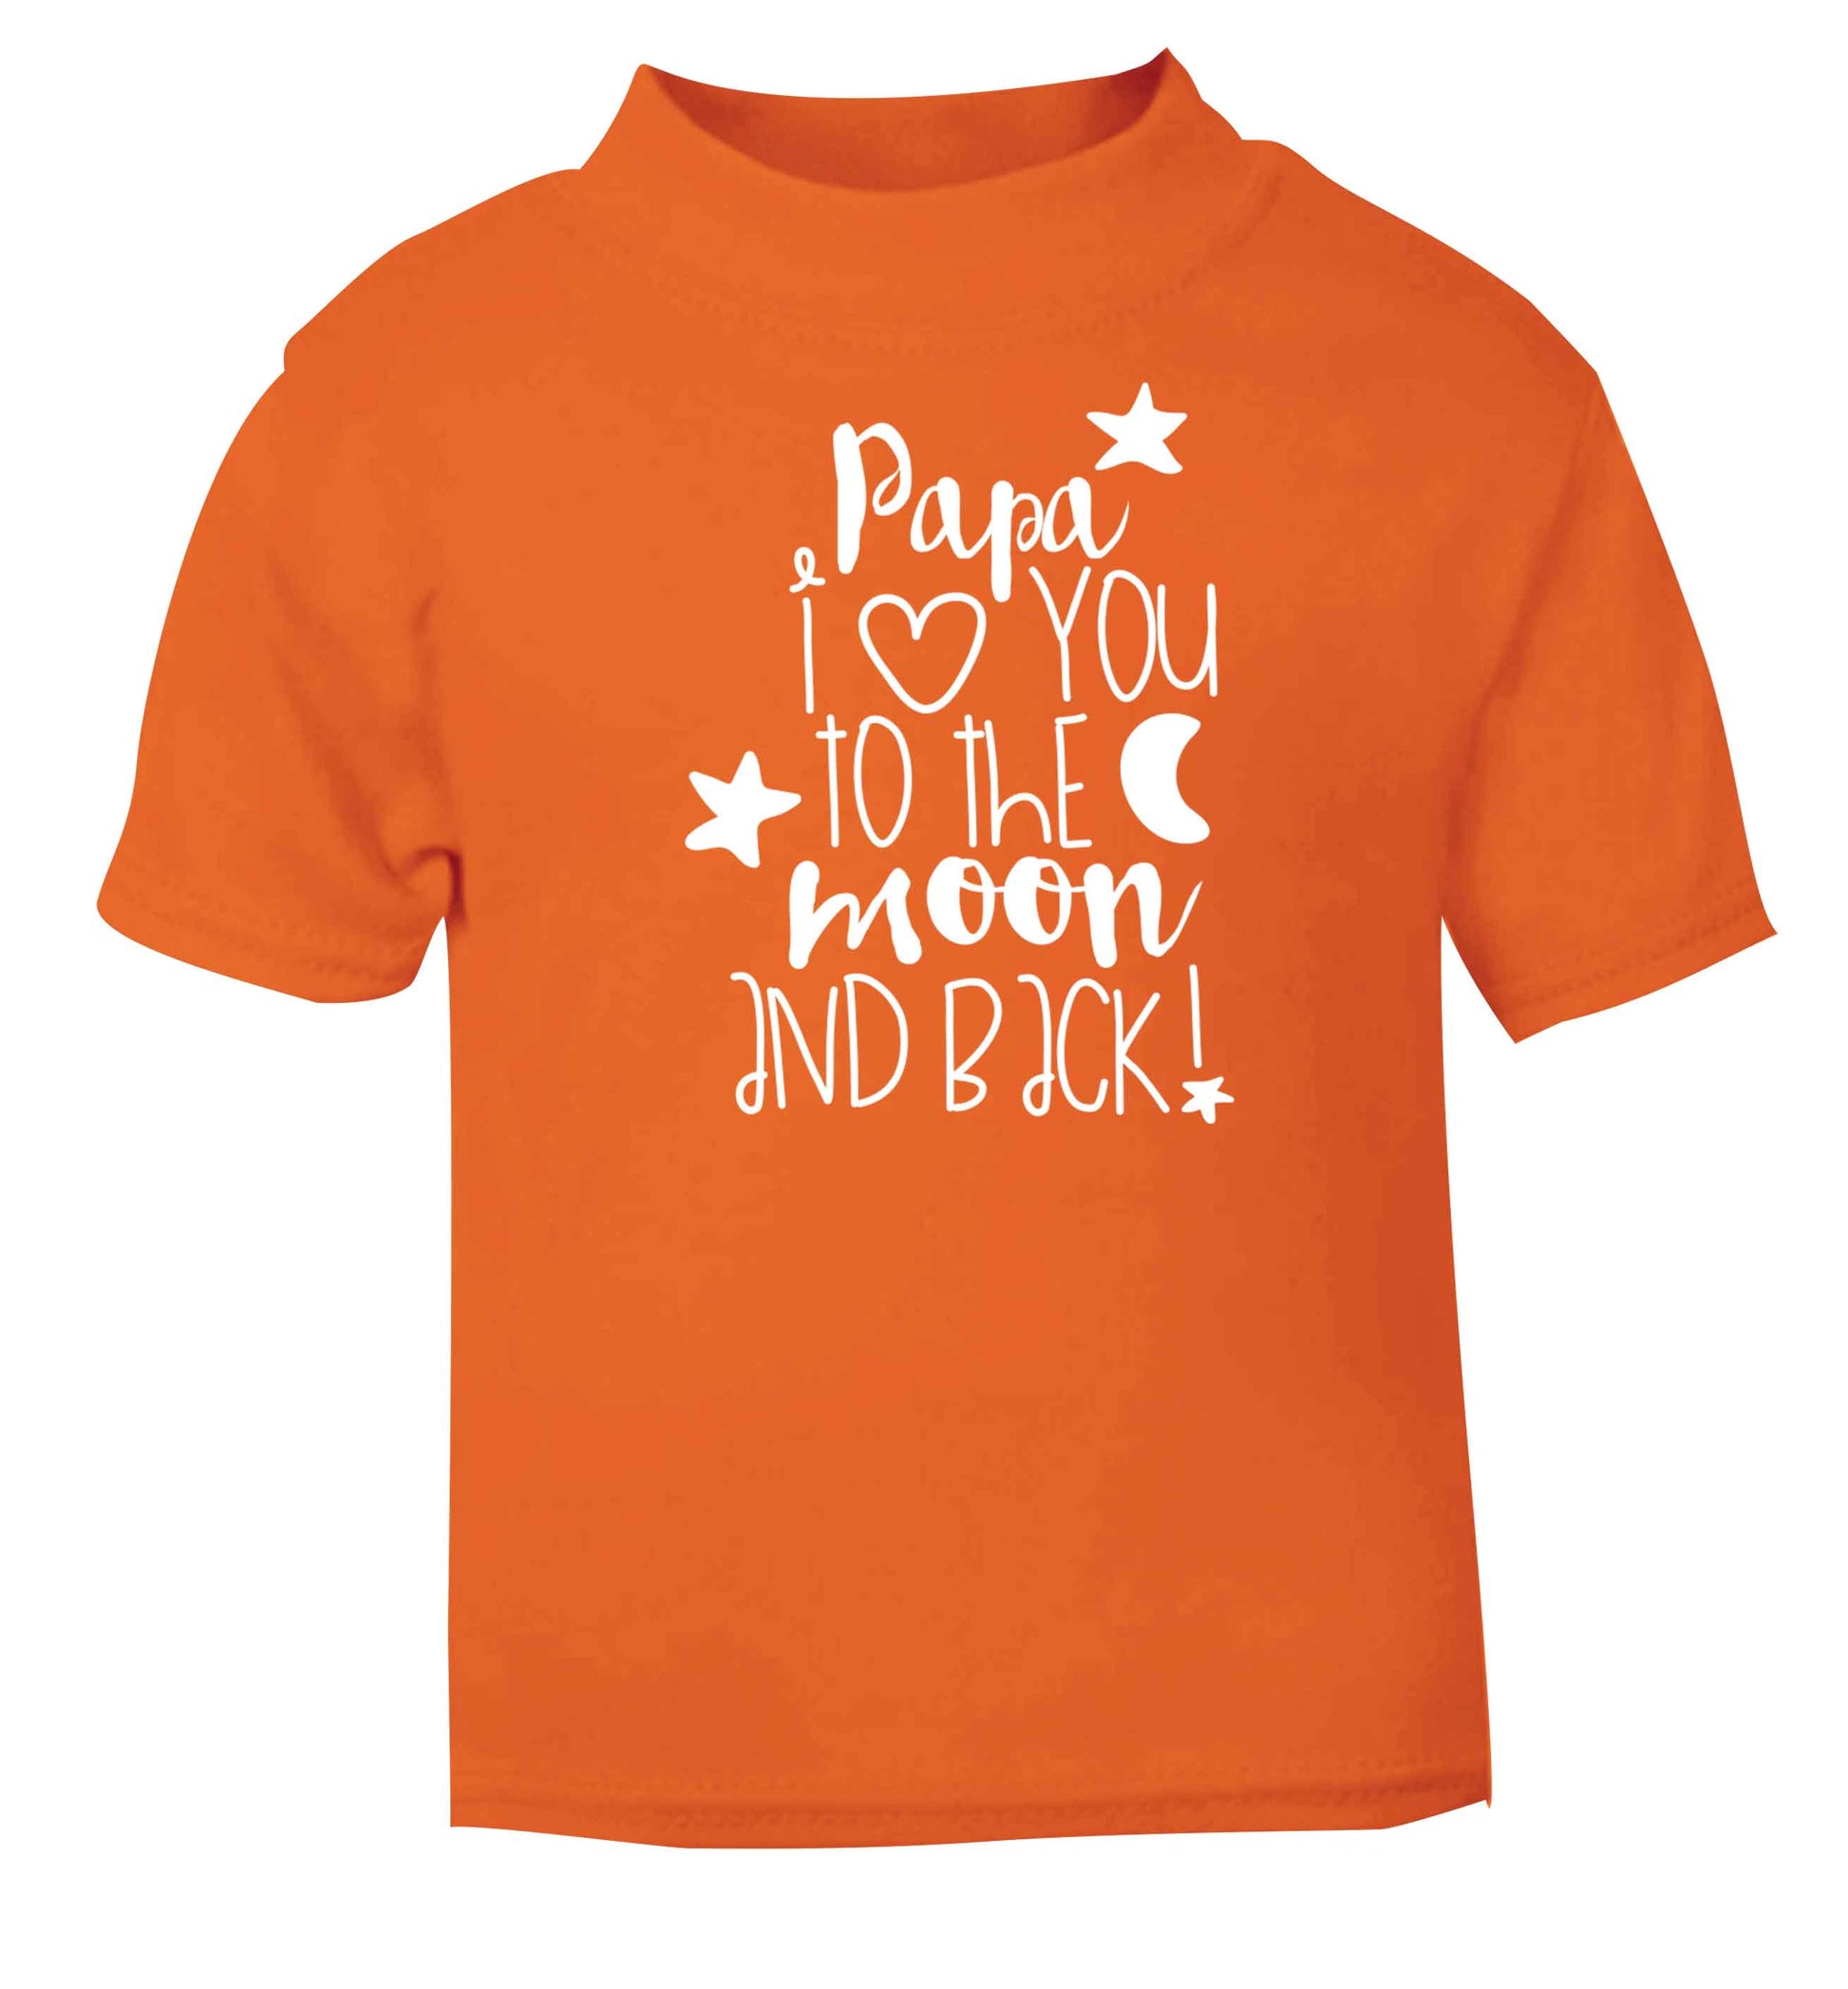 Papa I love you to the moon and back orange baby toddler Tshirt 2 Years